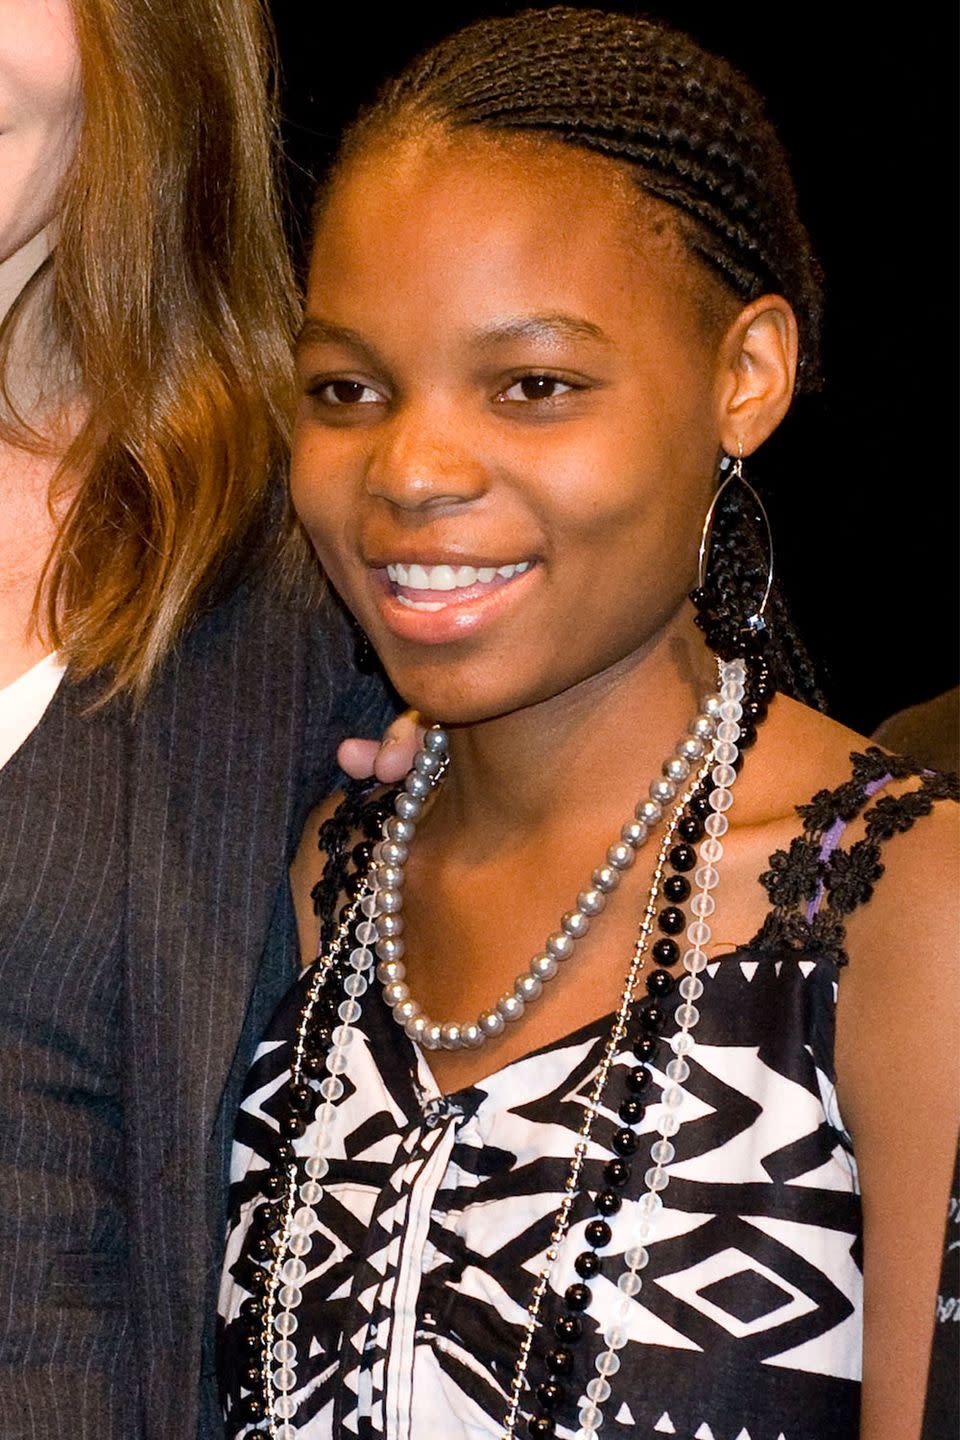 <p>Chama received the 2007 International Children's Peace Prize<span class="redactor-invisible-space"> when she was 16 for her work as an educational rights activist in Zambia. She has also been a crusader for the rights of people living with HIV/AIDS in Africa.</span></p>